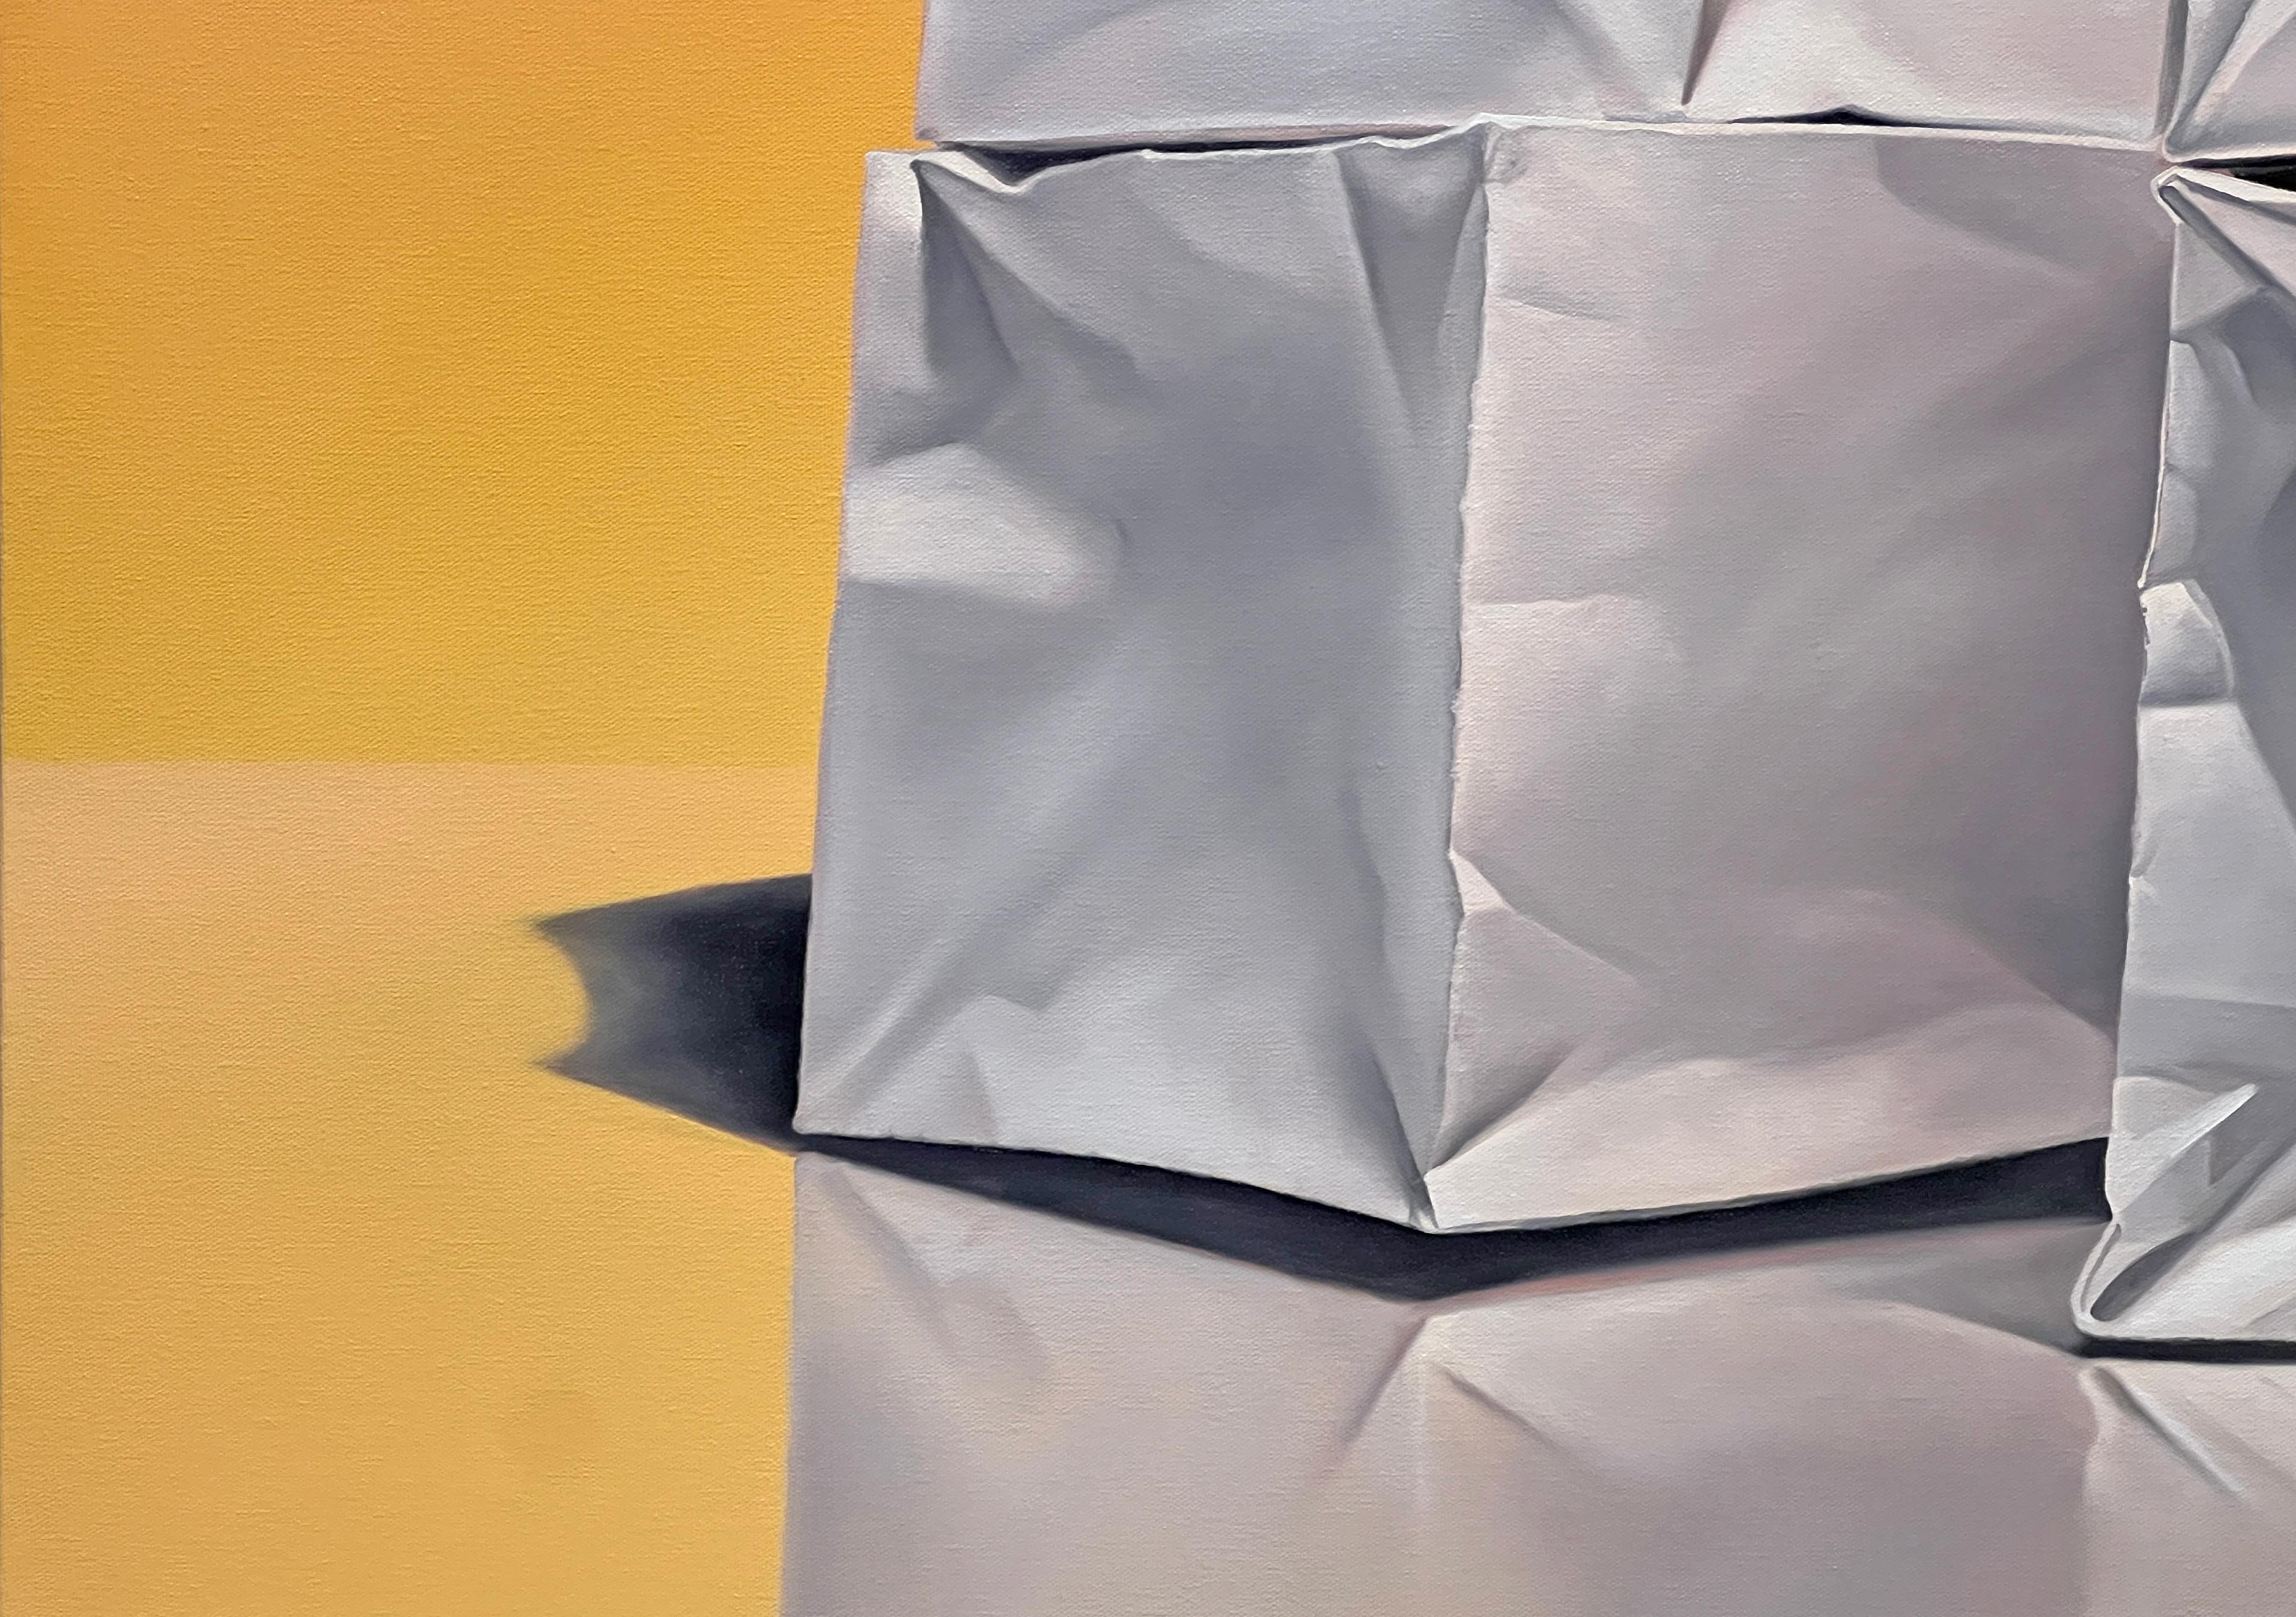 NIMBOSTRATUS - Photorealism / Still Life with Origami / High Color Sunset - Photorealist Painting by Kevin Palme